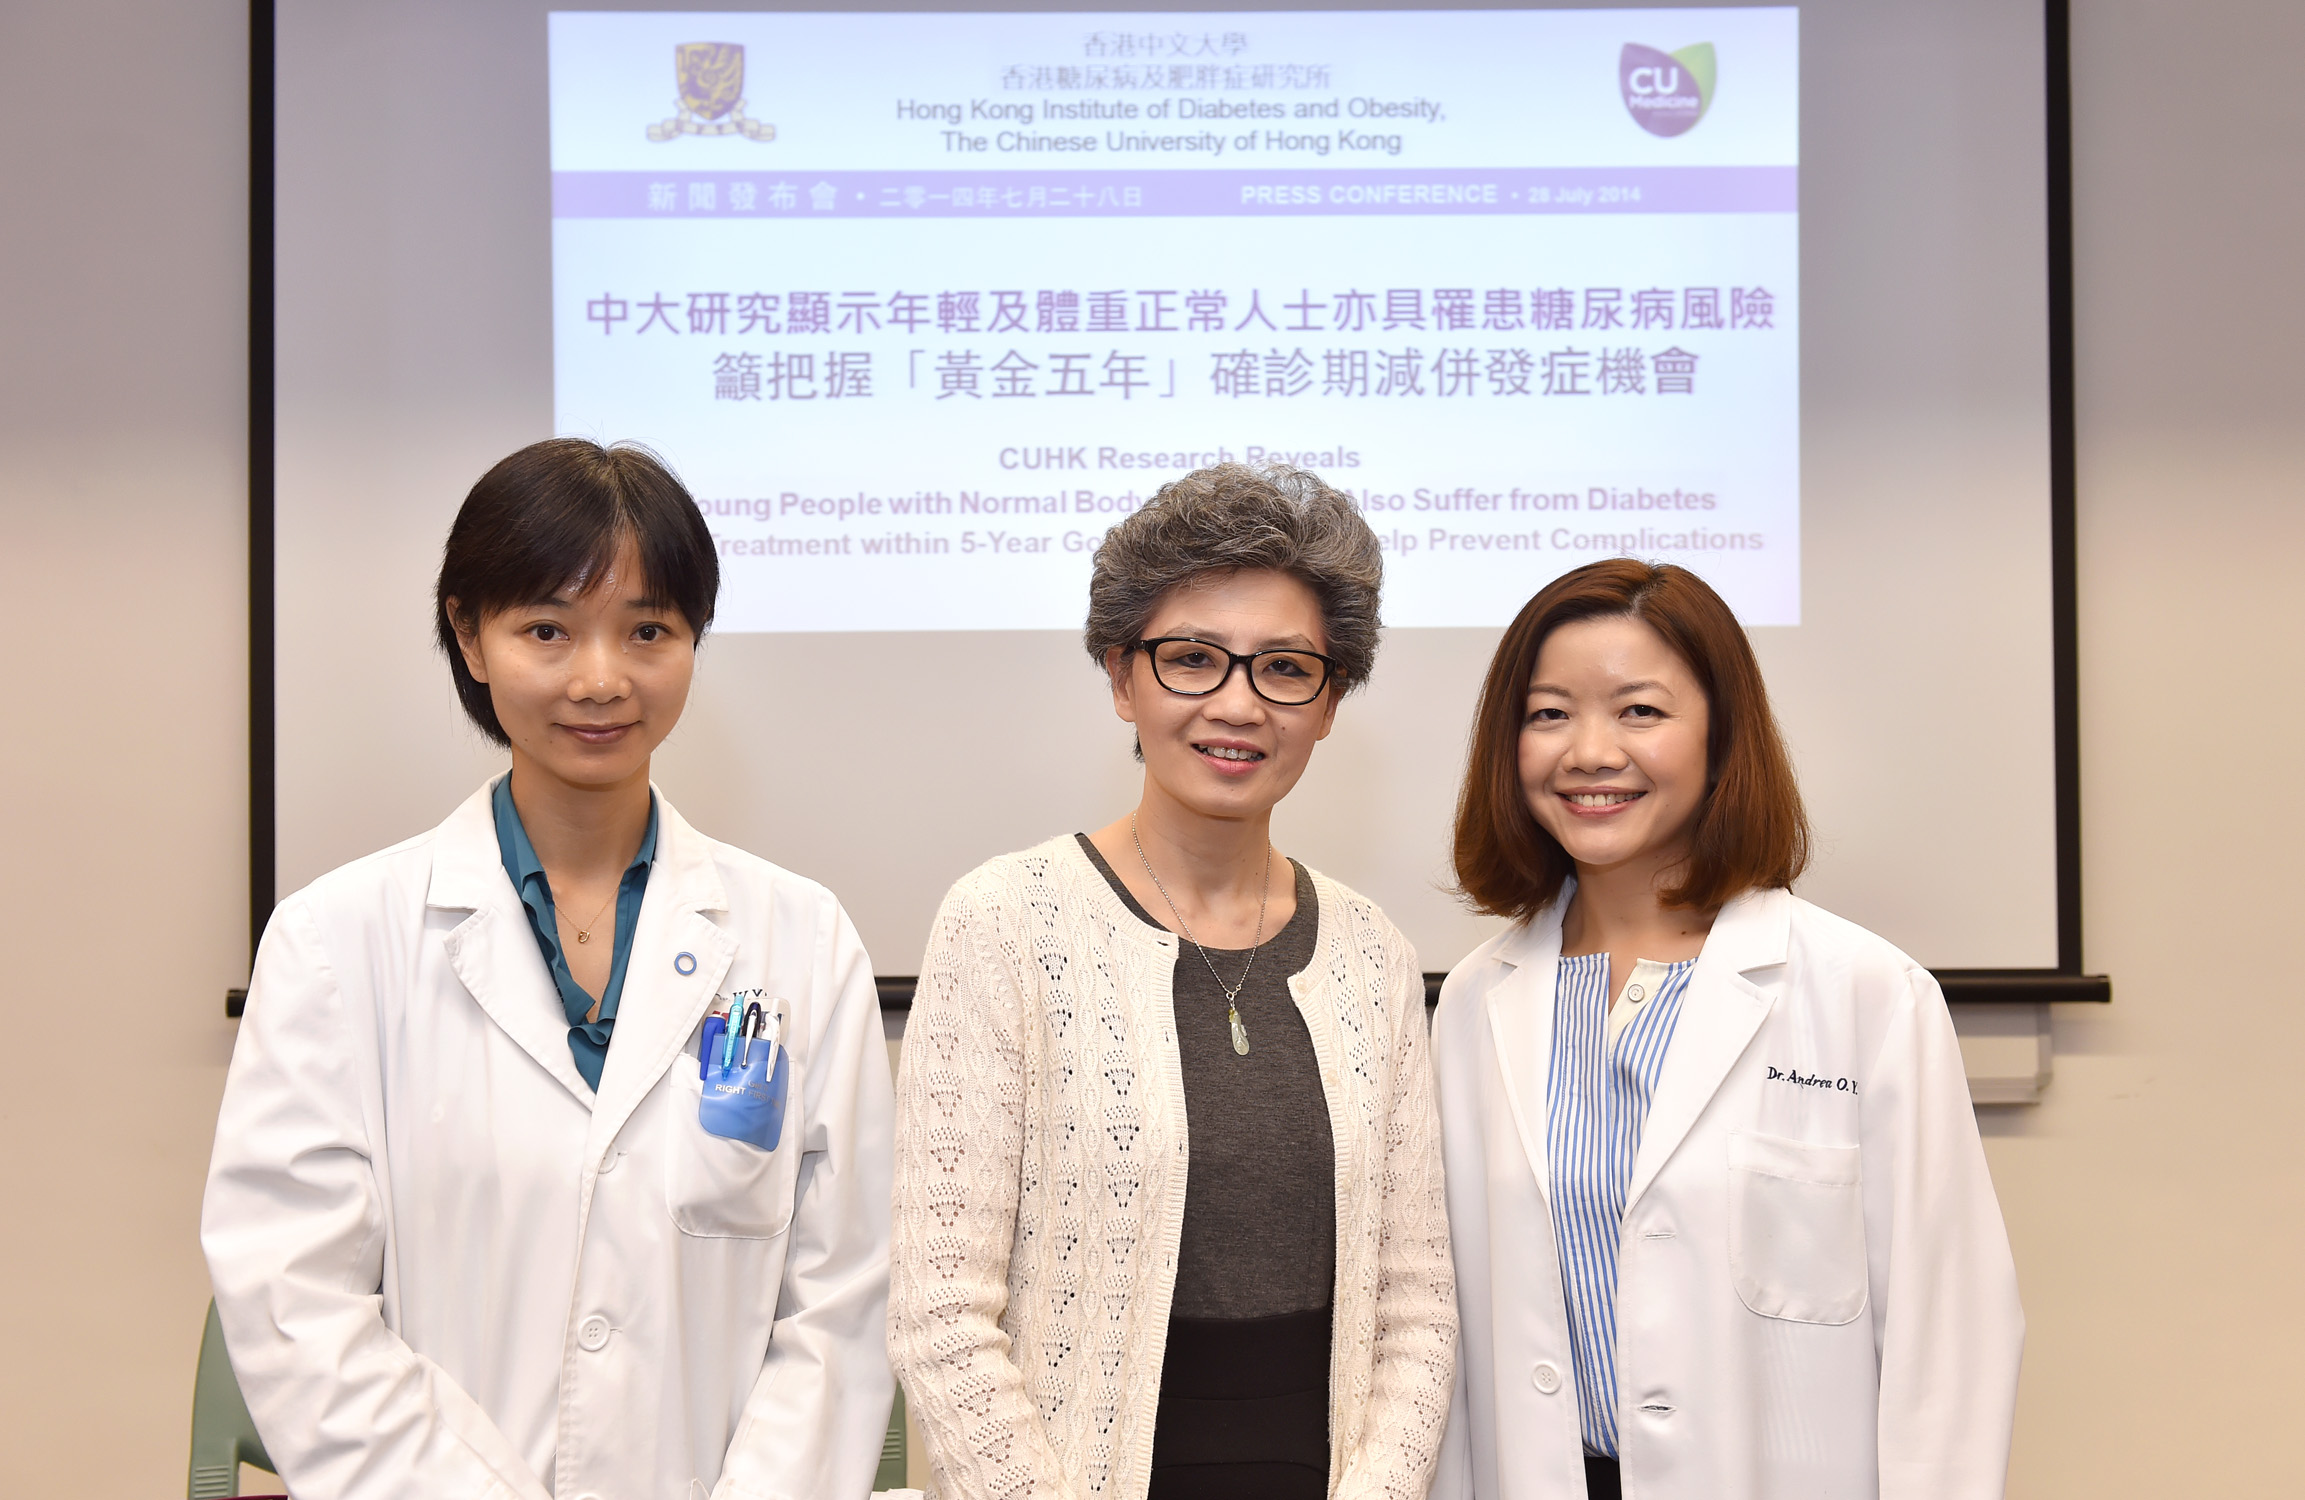  Dr. Wing-yee SO, Honorary Clinical Associate Professor